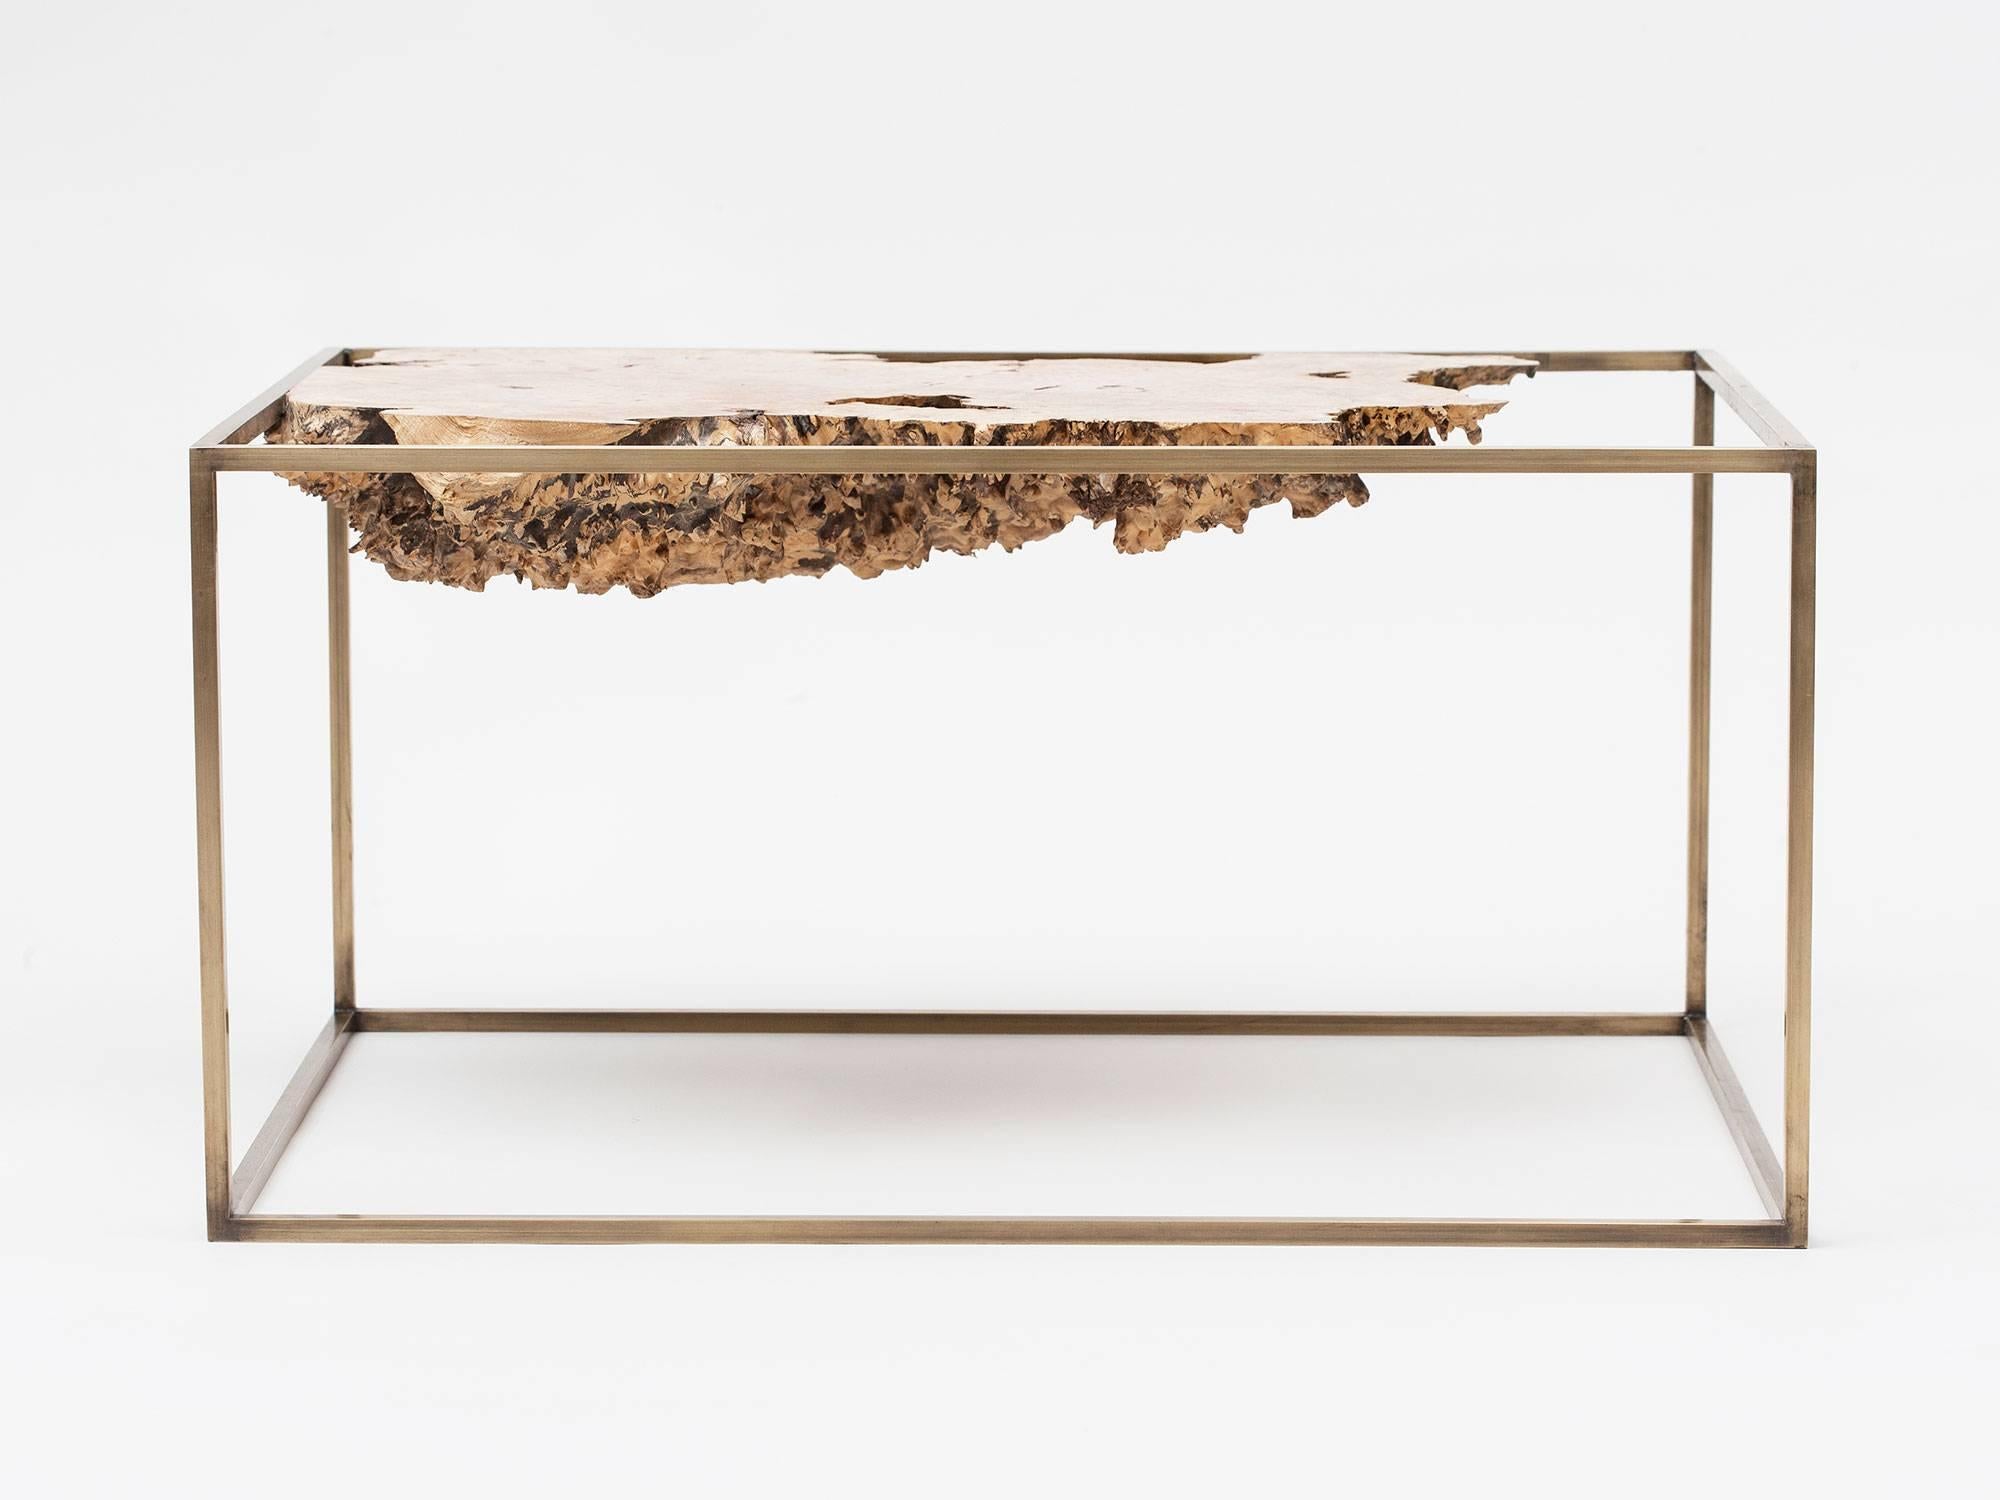 The largest in Huy Bui's the Geological Frame series, the 